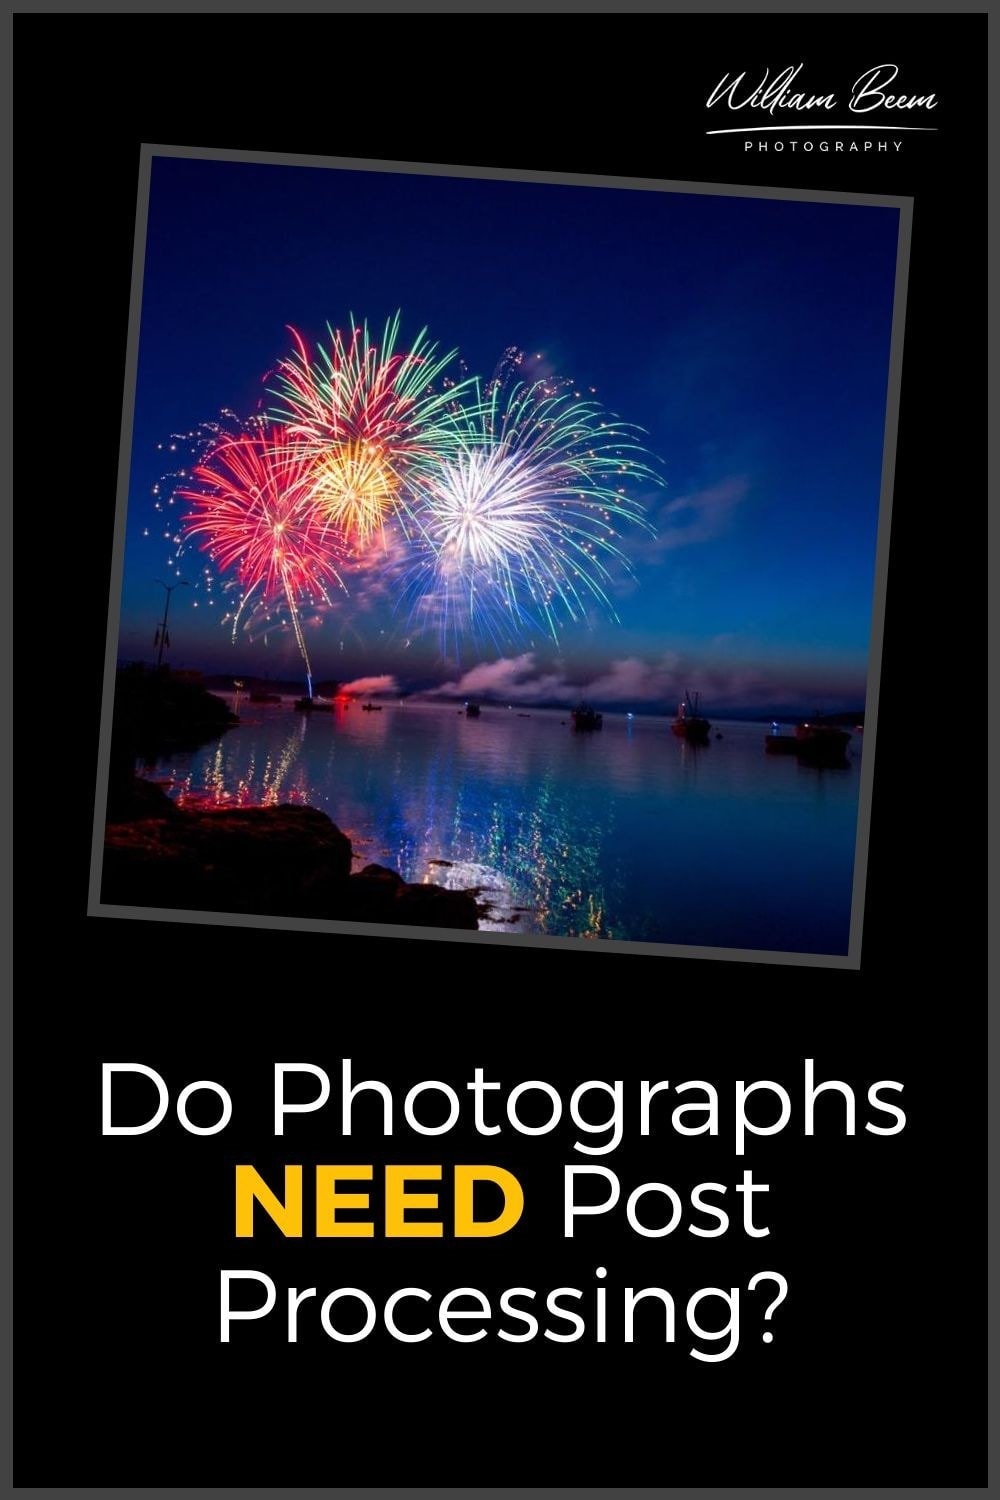 Do Photographs Need Post Processing